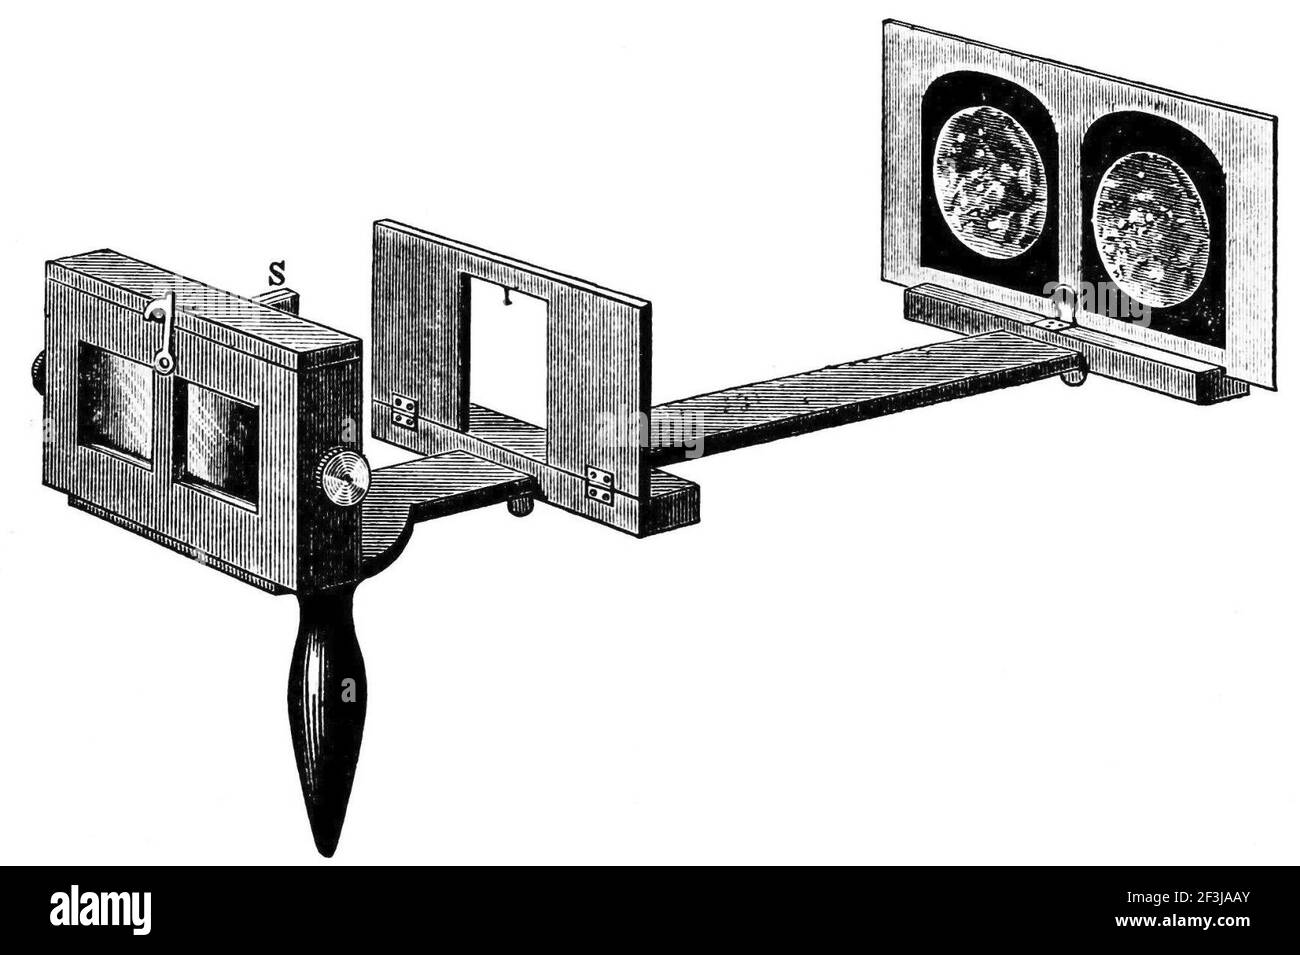 Stereoscope adjustable for reversed perspective. Stock Photo